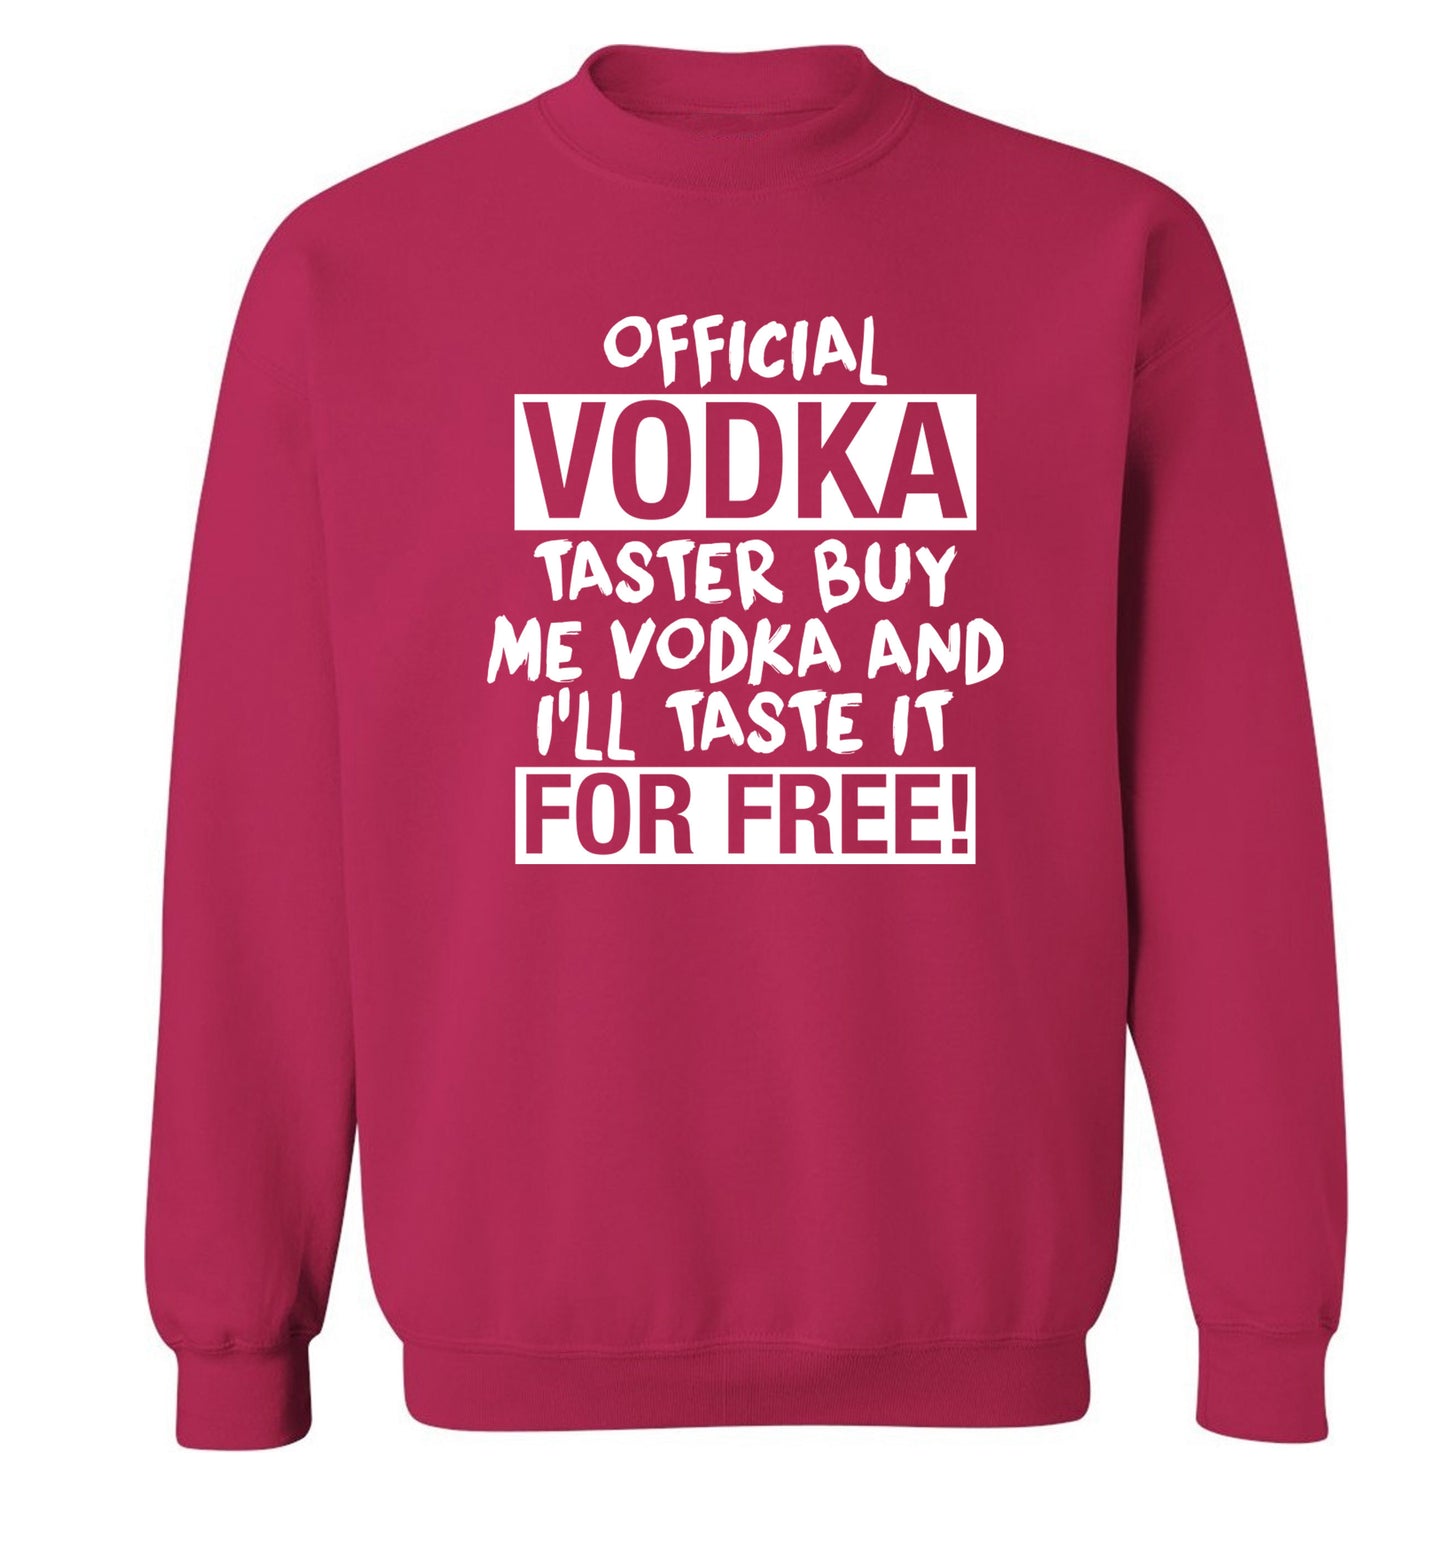 Official vodka taster buy me vodka and I'll taste it for free Adult's unisex pink Sweater 2XL